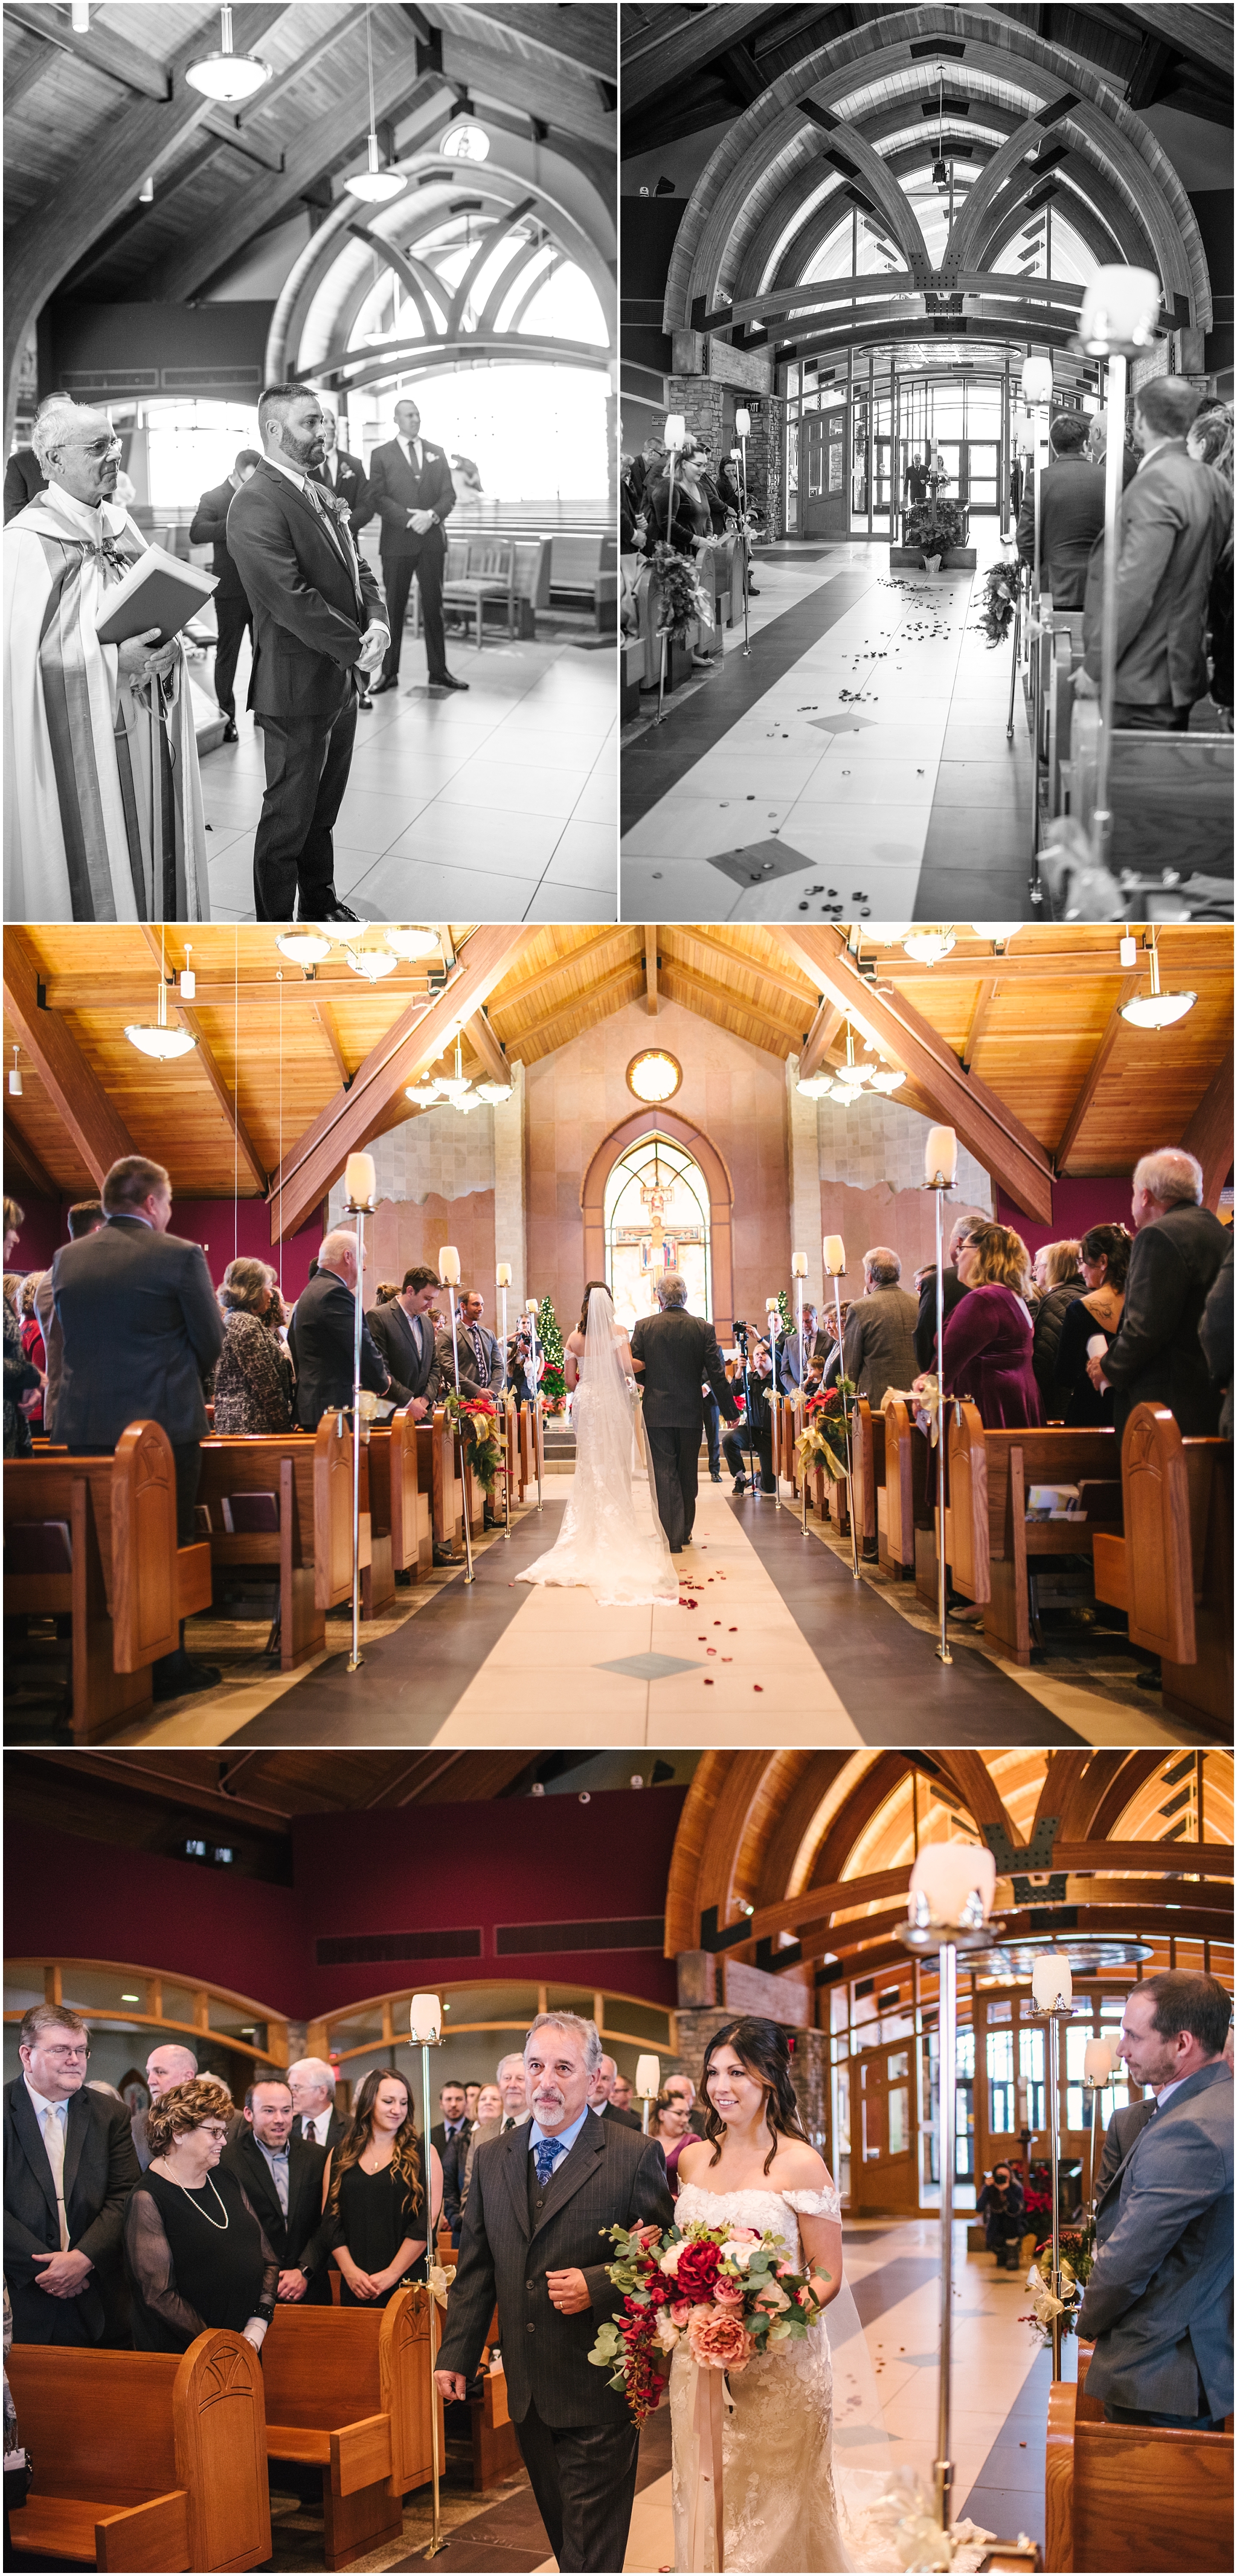 Bride's entrance to winter wedding ceremony at St Francis of Assisi Catholic Church